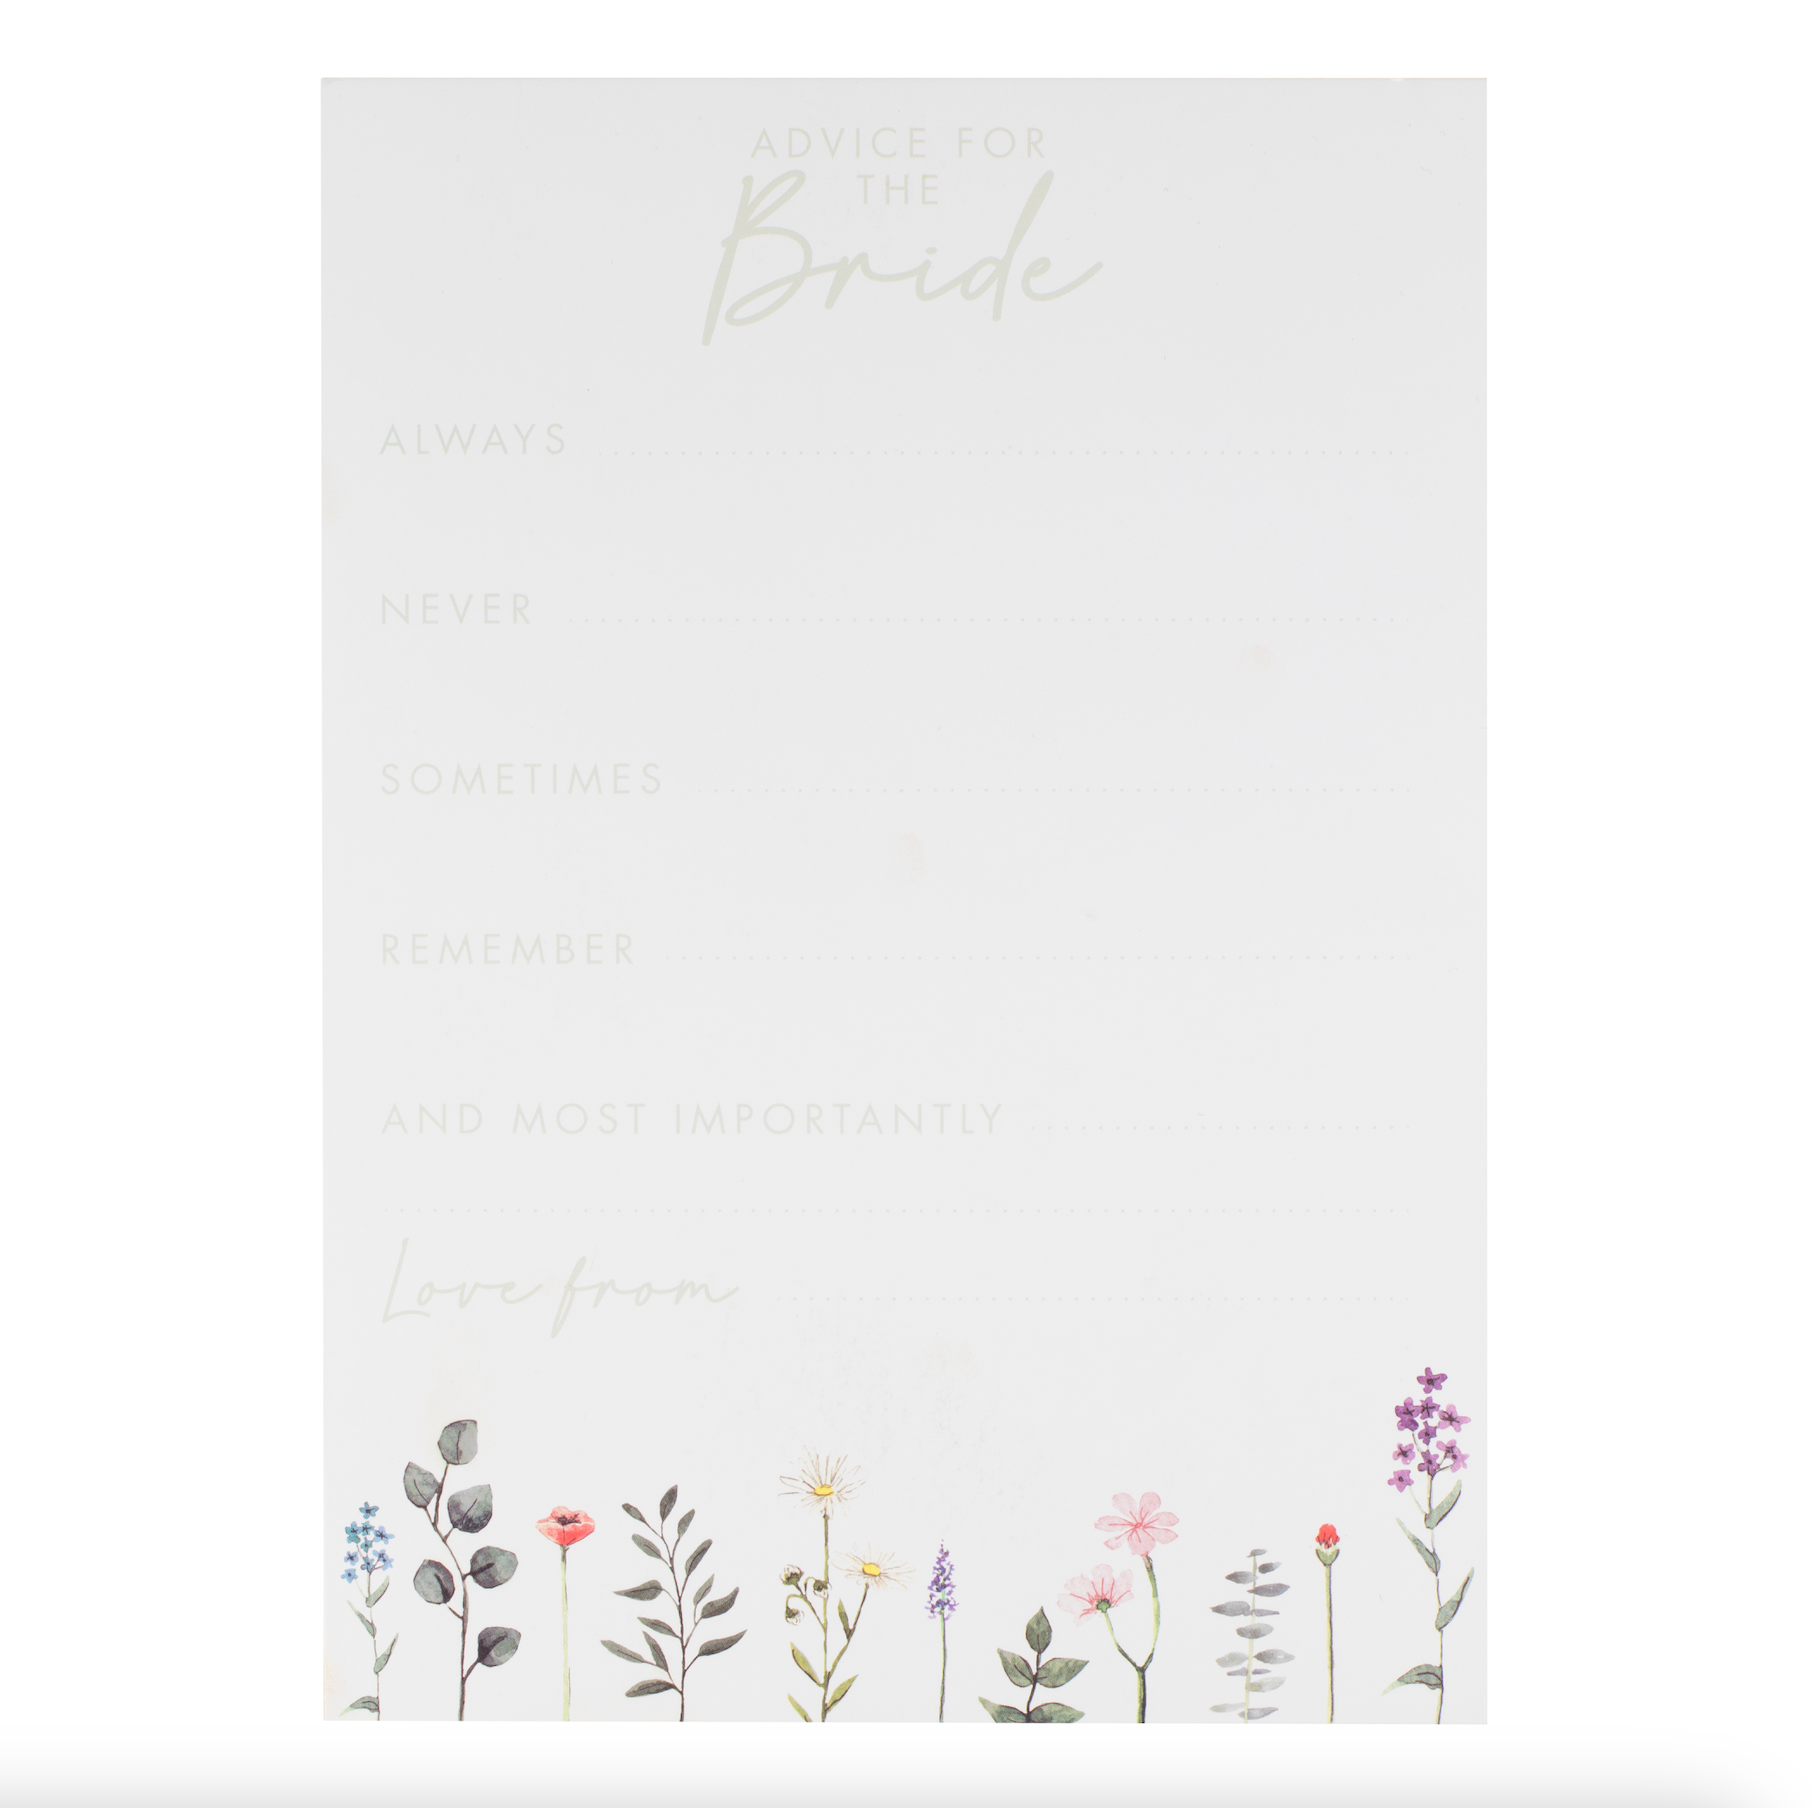 Floral Advice for the Bride Cards